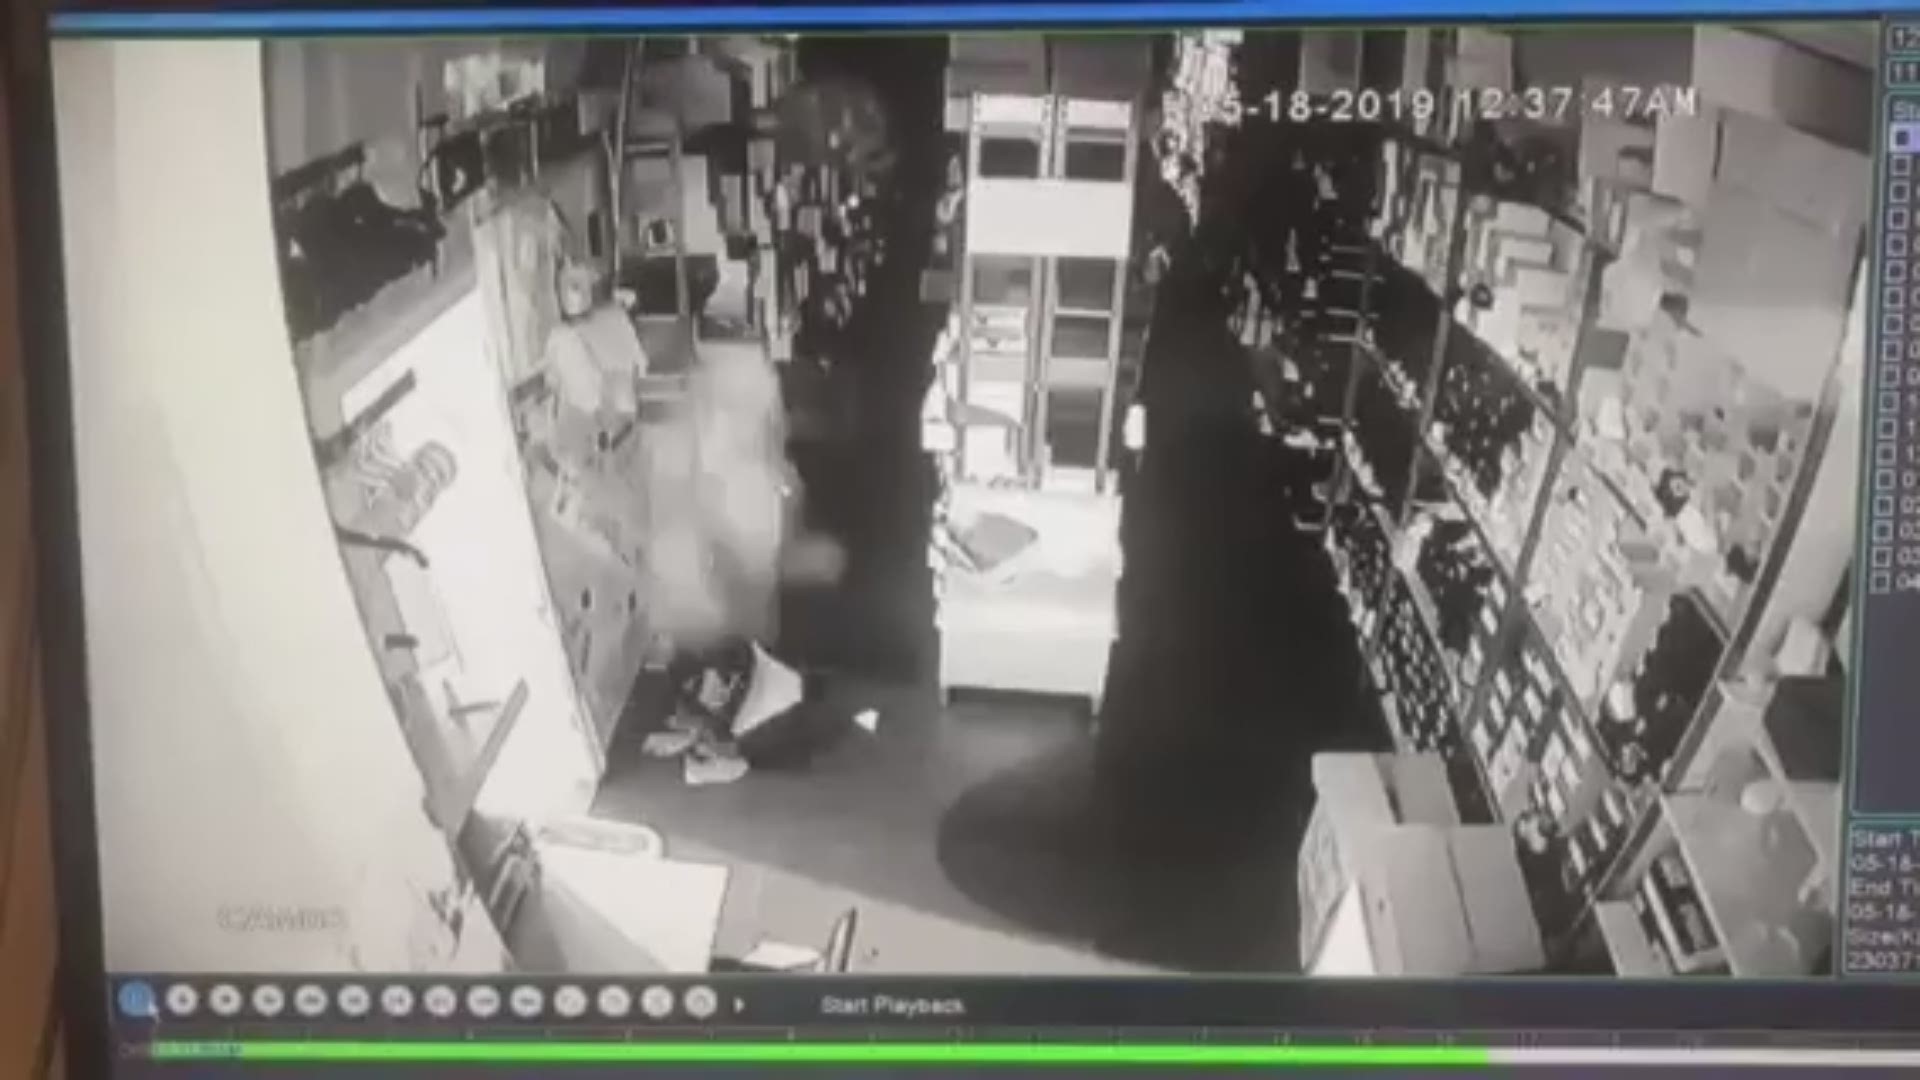 Surveillance video obtained by NOPD shows three unidentified male burglars break in through the ceiling of the Elite Sports store located on Gentilly Boulevard on May 18, just after midnight.